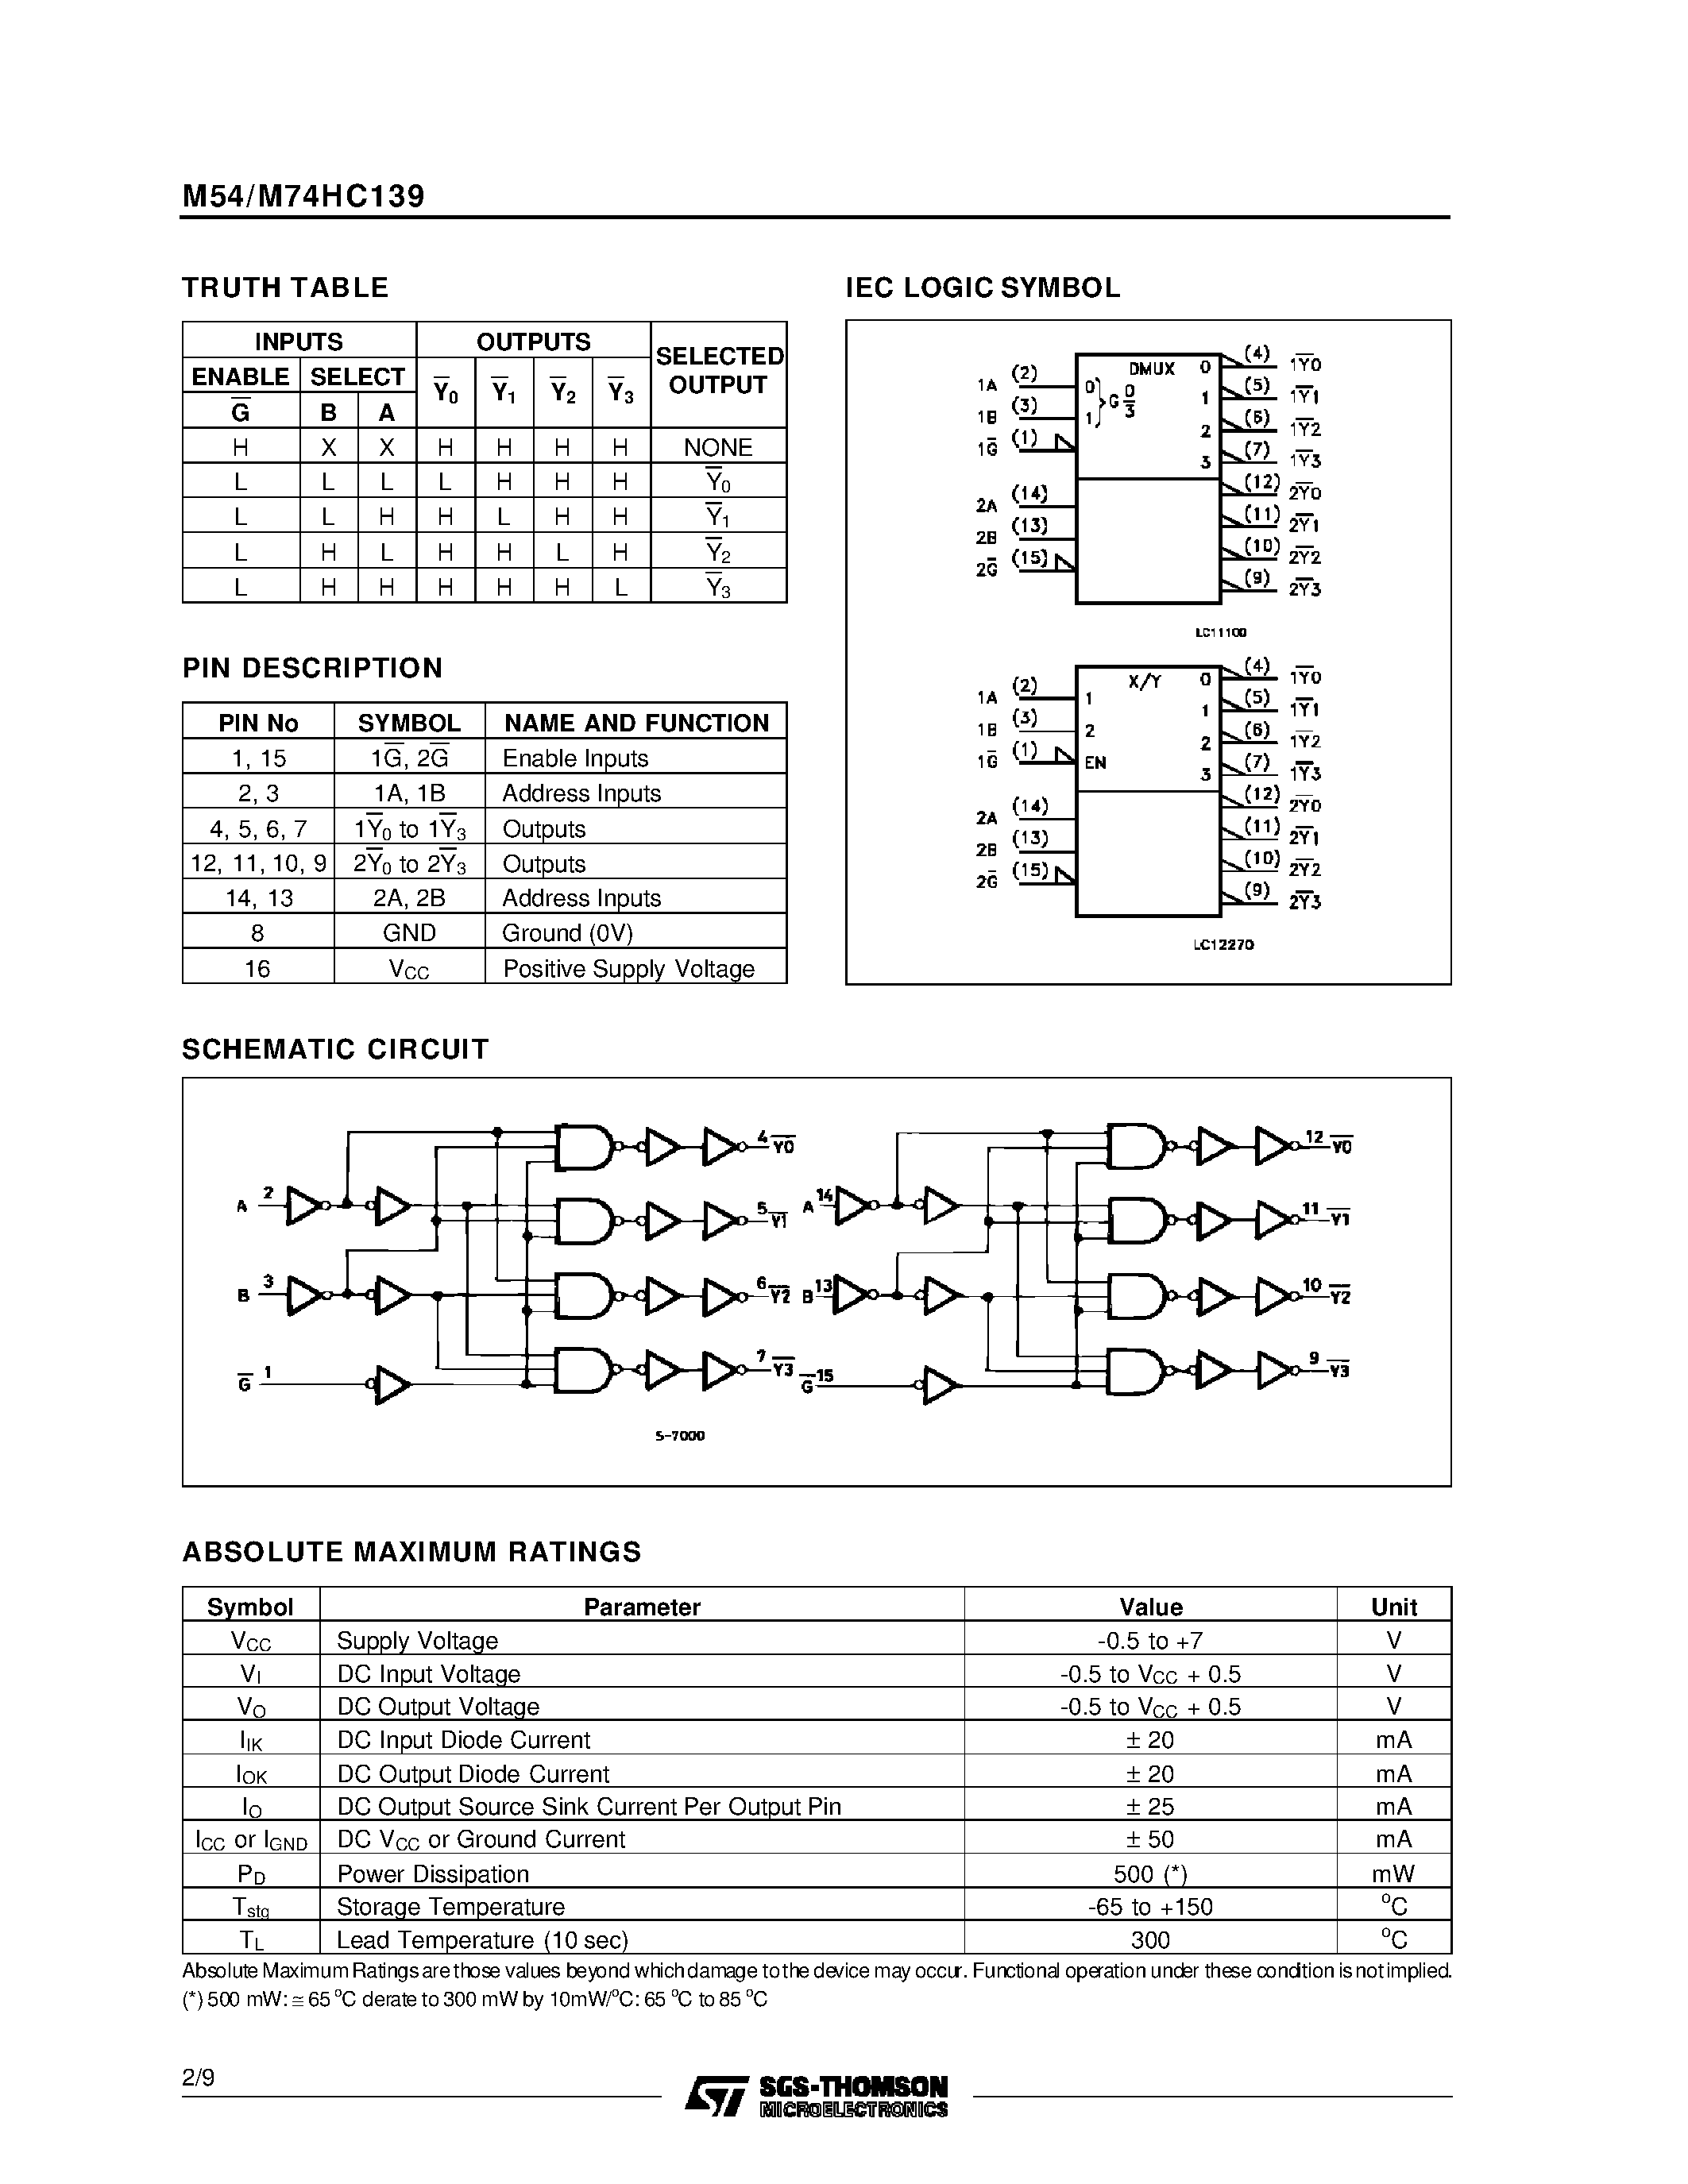 Datasheet M74HC139 - M54HC138F1R M74HC138M1R M74HC138B1R M74HC138C1R page 2